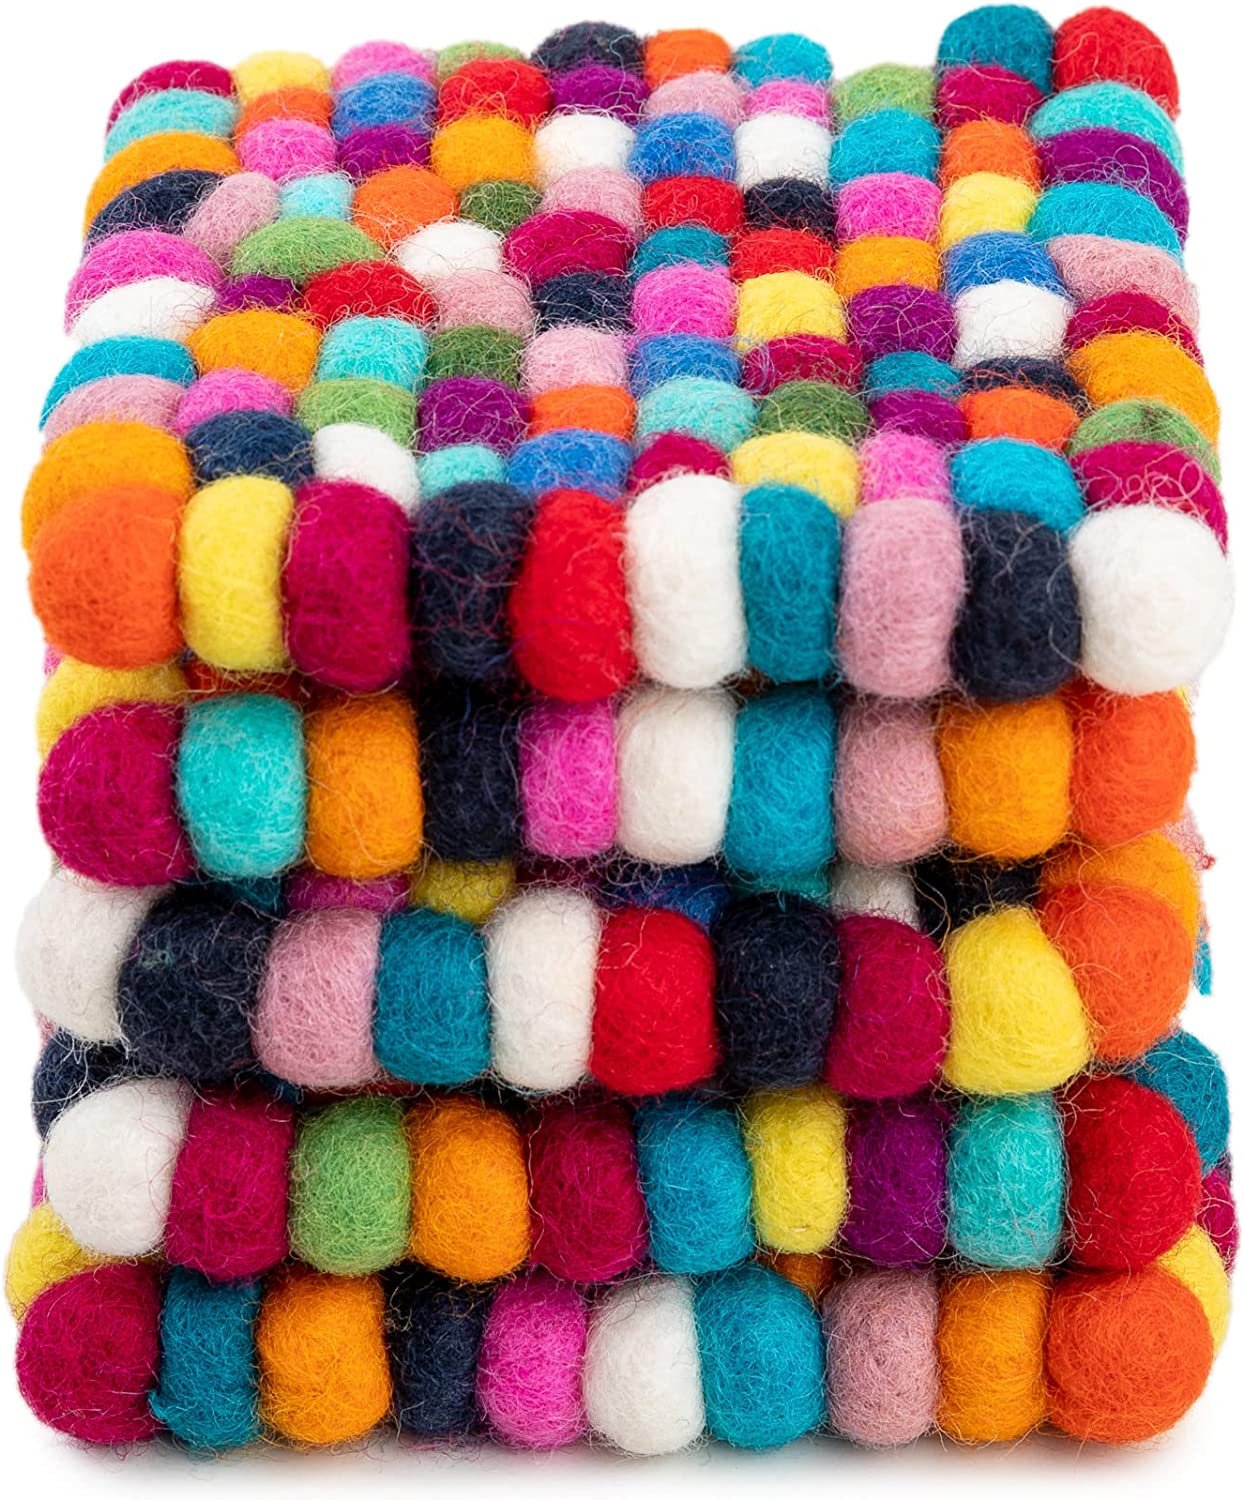 Square Felt Ball Coasters - 100% Merino Wool Table Coasters - Felt Coaster Pads, Absorbent Trivet for Drinks - Heat Resistant, Thick & Durable Hand Felted in Nepal by Woolygon- Multicolor - Set of 5